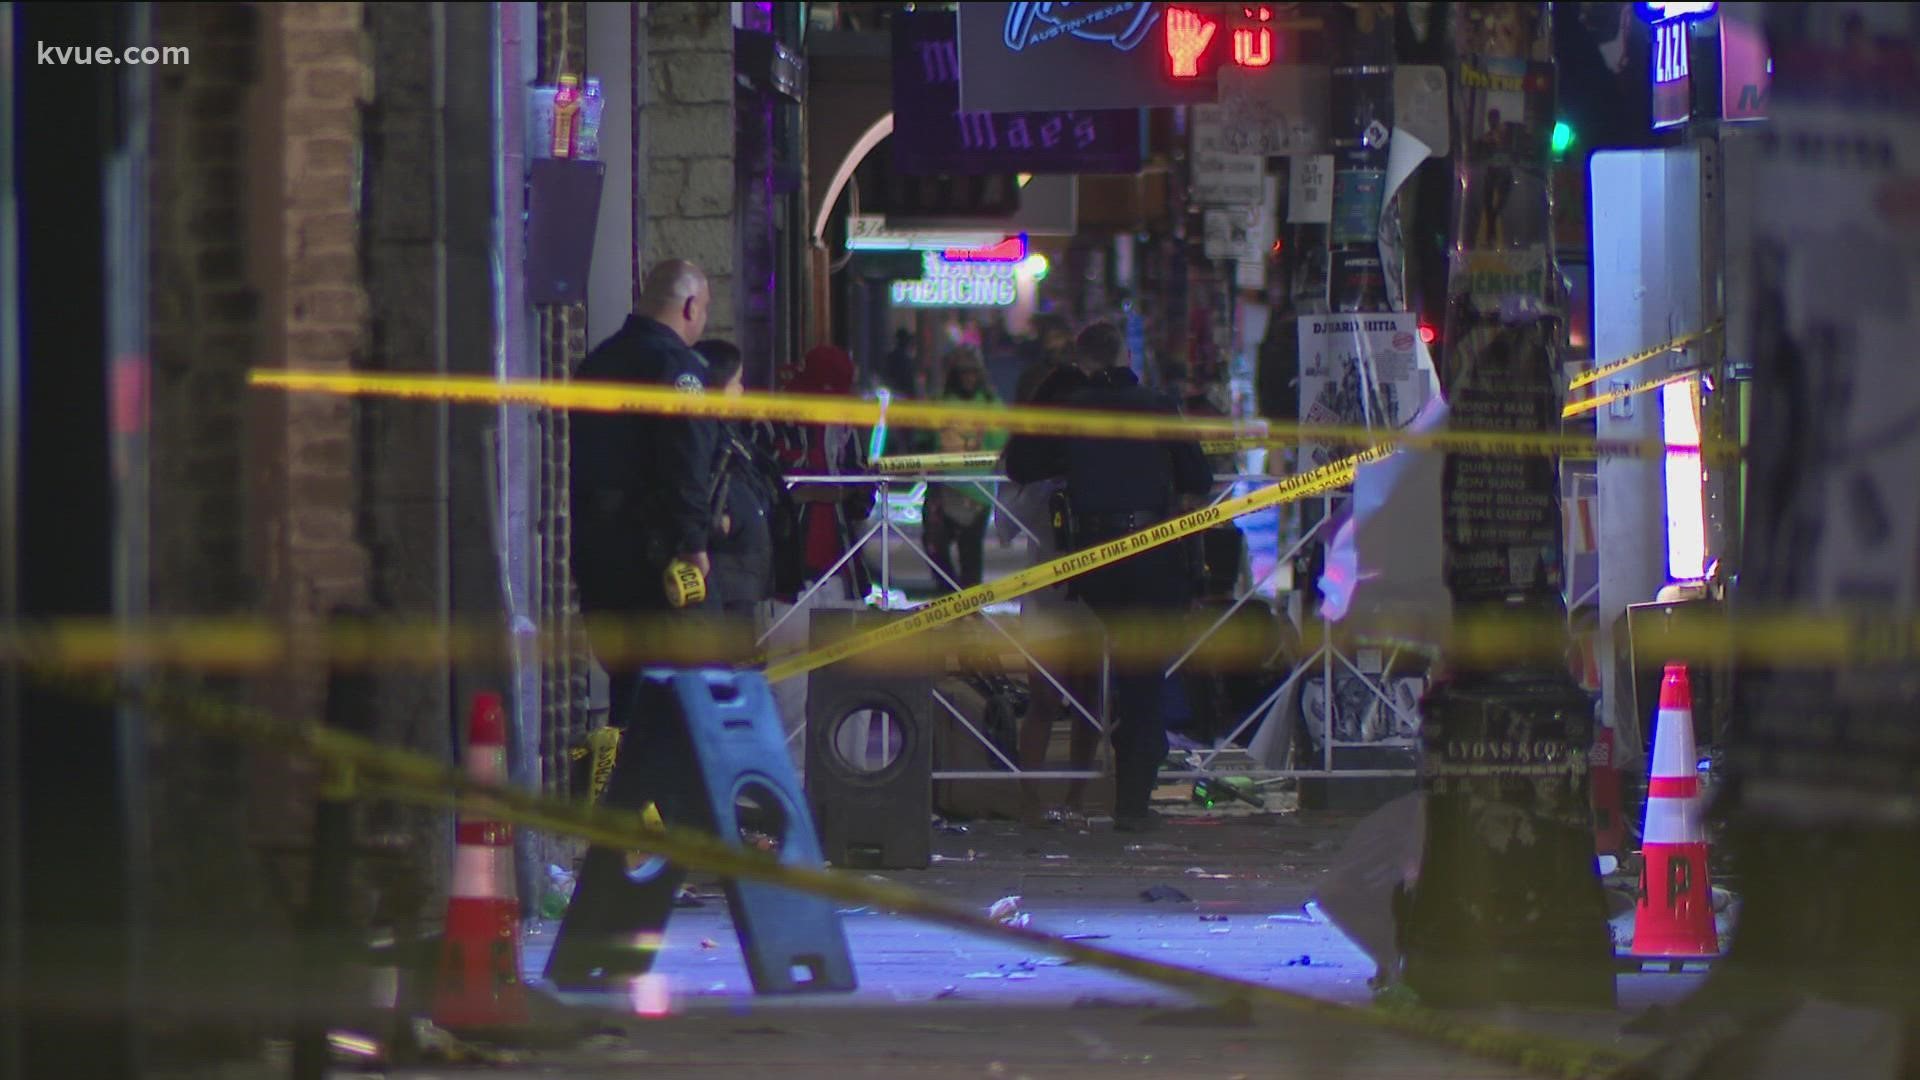 South by Southwest 2022 came to a shocking end with four people injured in a shooting on East Sixth Street.